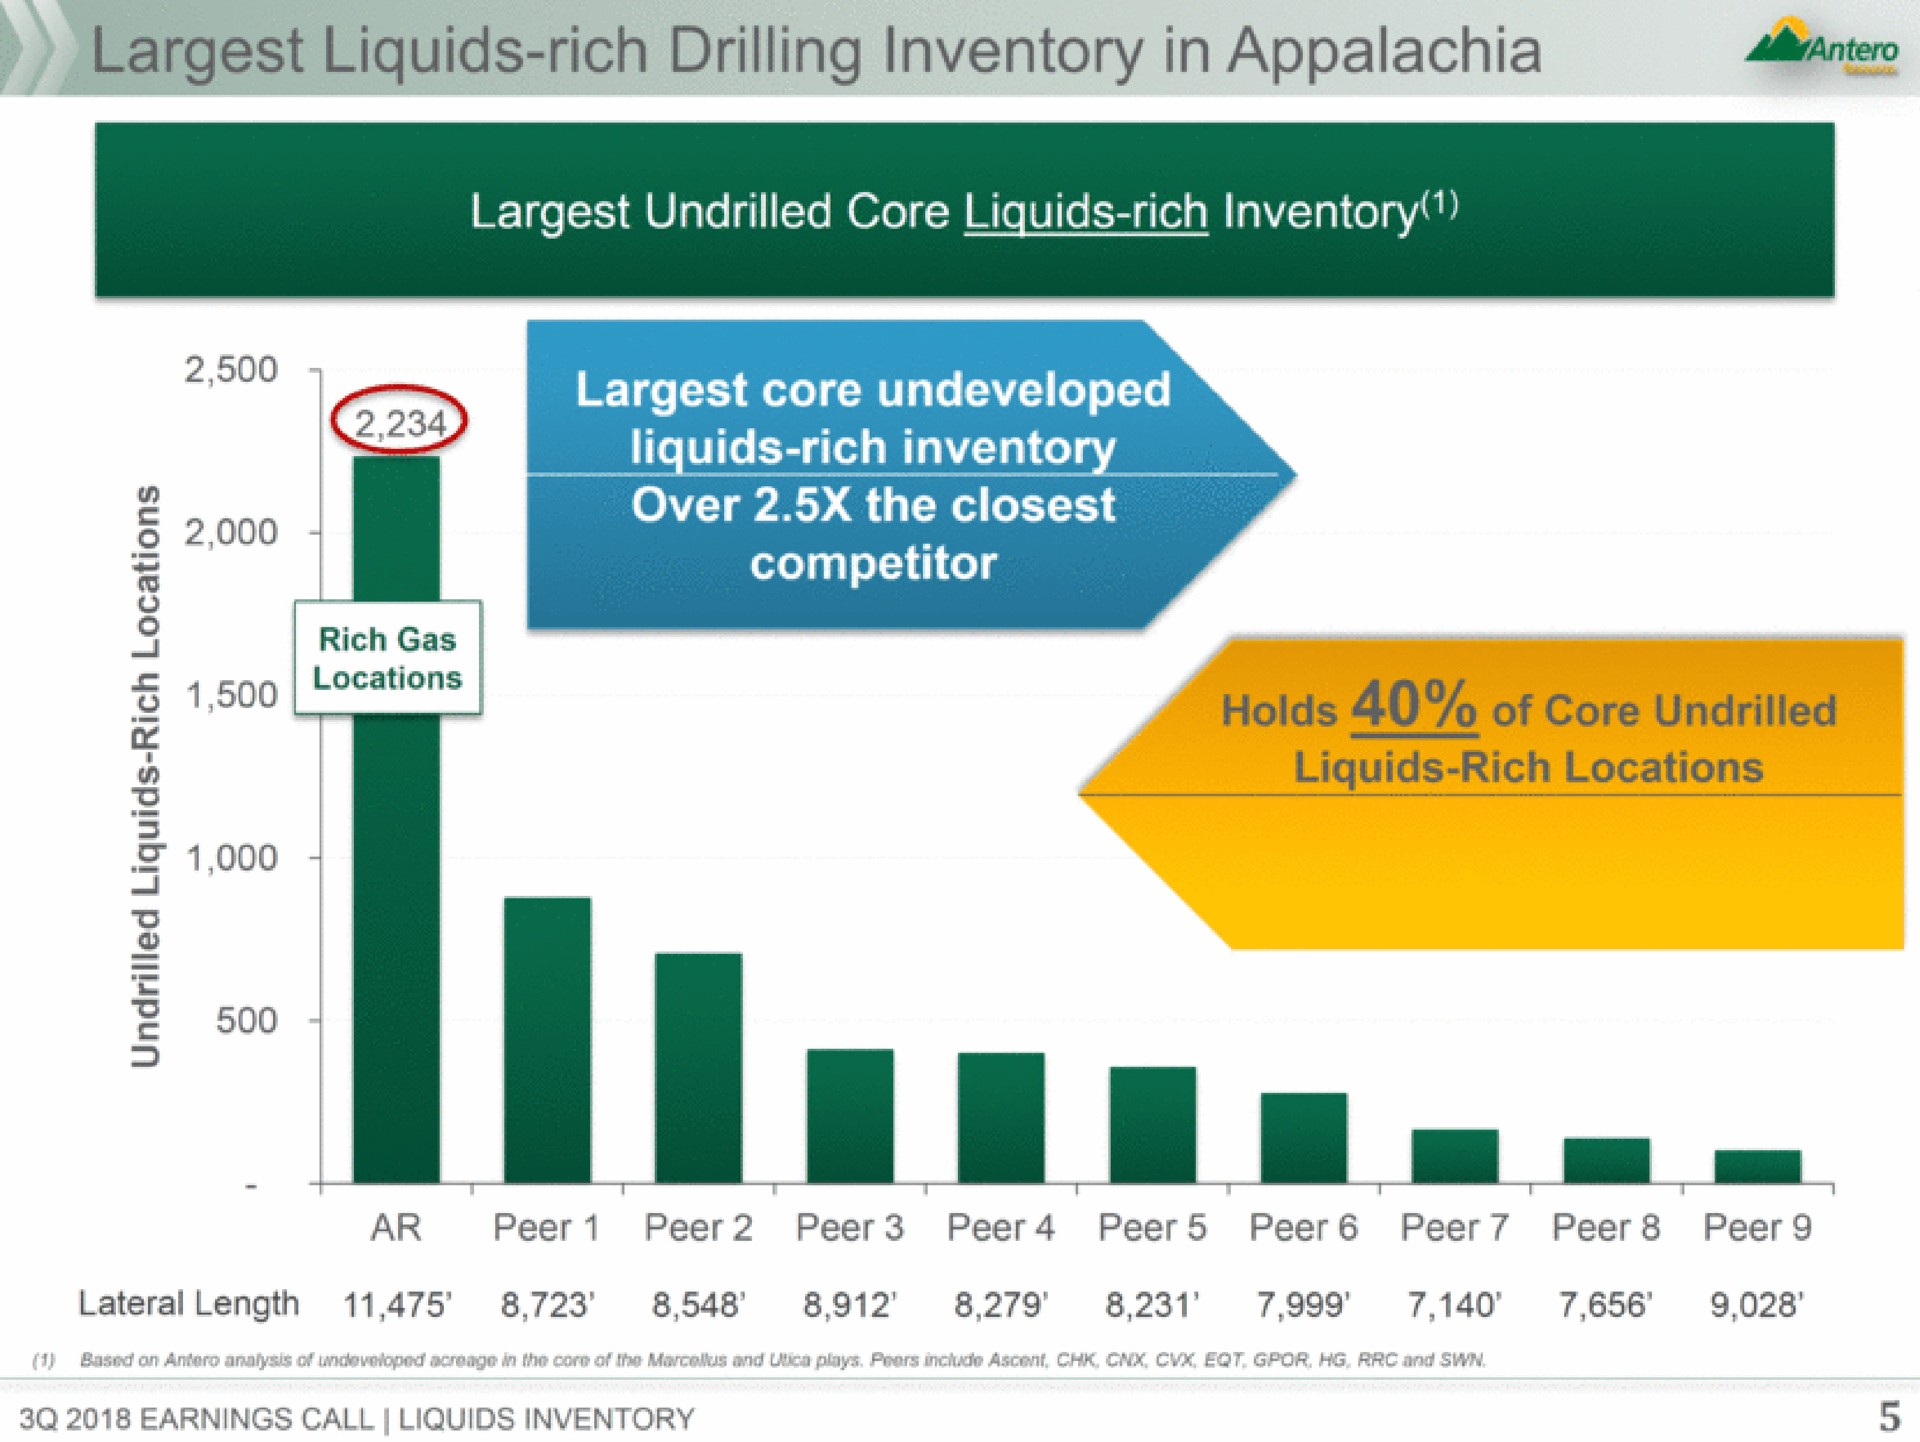 liquids rich drilling inventory in ale core undeveloped liquids rich inventory me on wee | Antero Midstream Partners